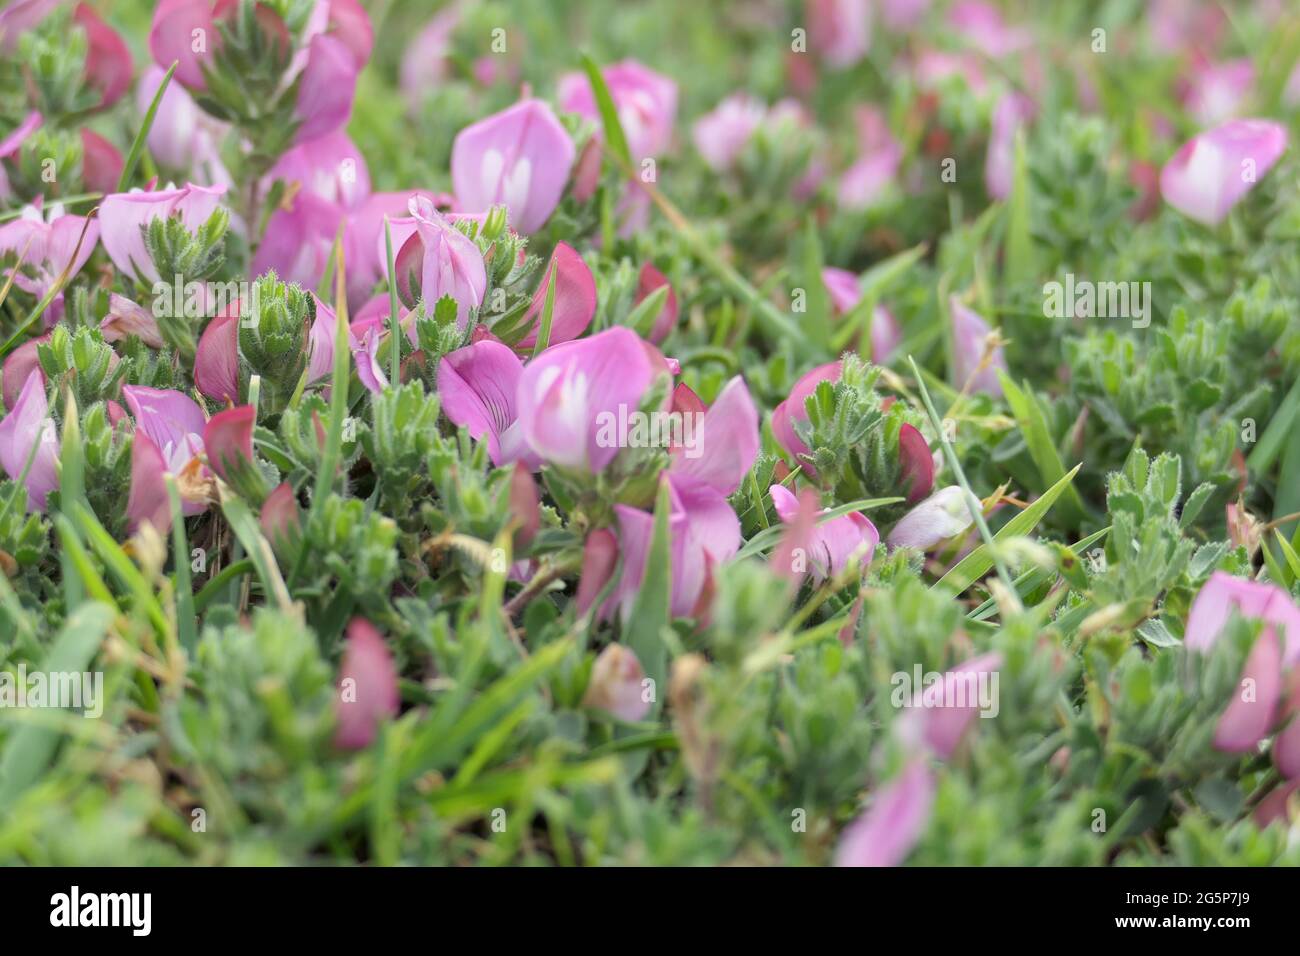 Macro close-up of the flowers of Spiny Restharrow (Ononis Spinosa), possibly s. procurrens, in the dunes along the Dutch coast Stock Photo